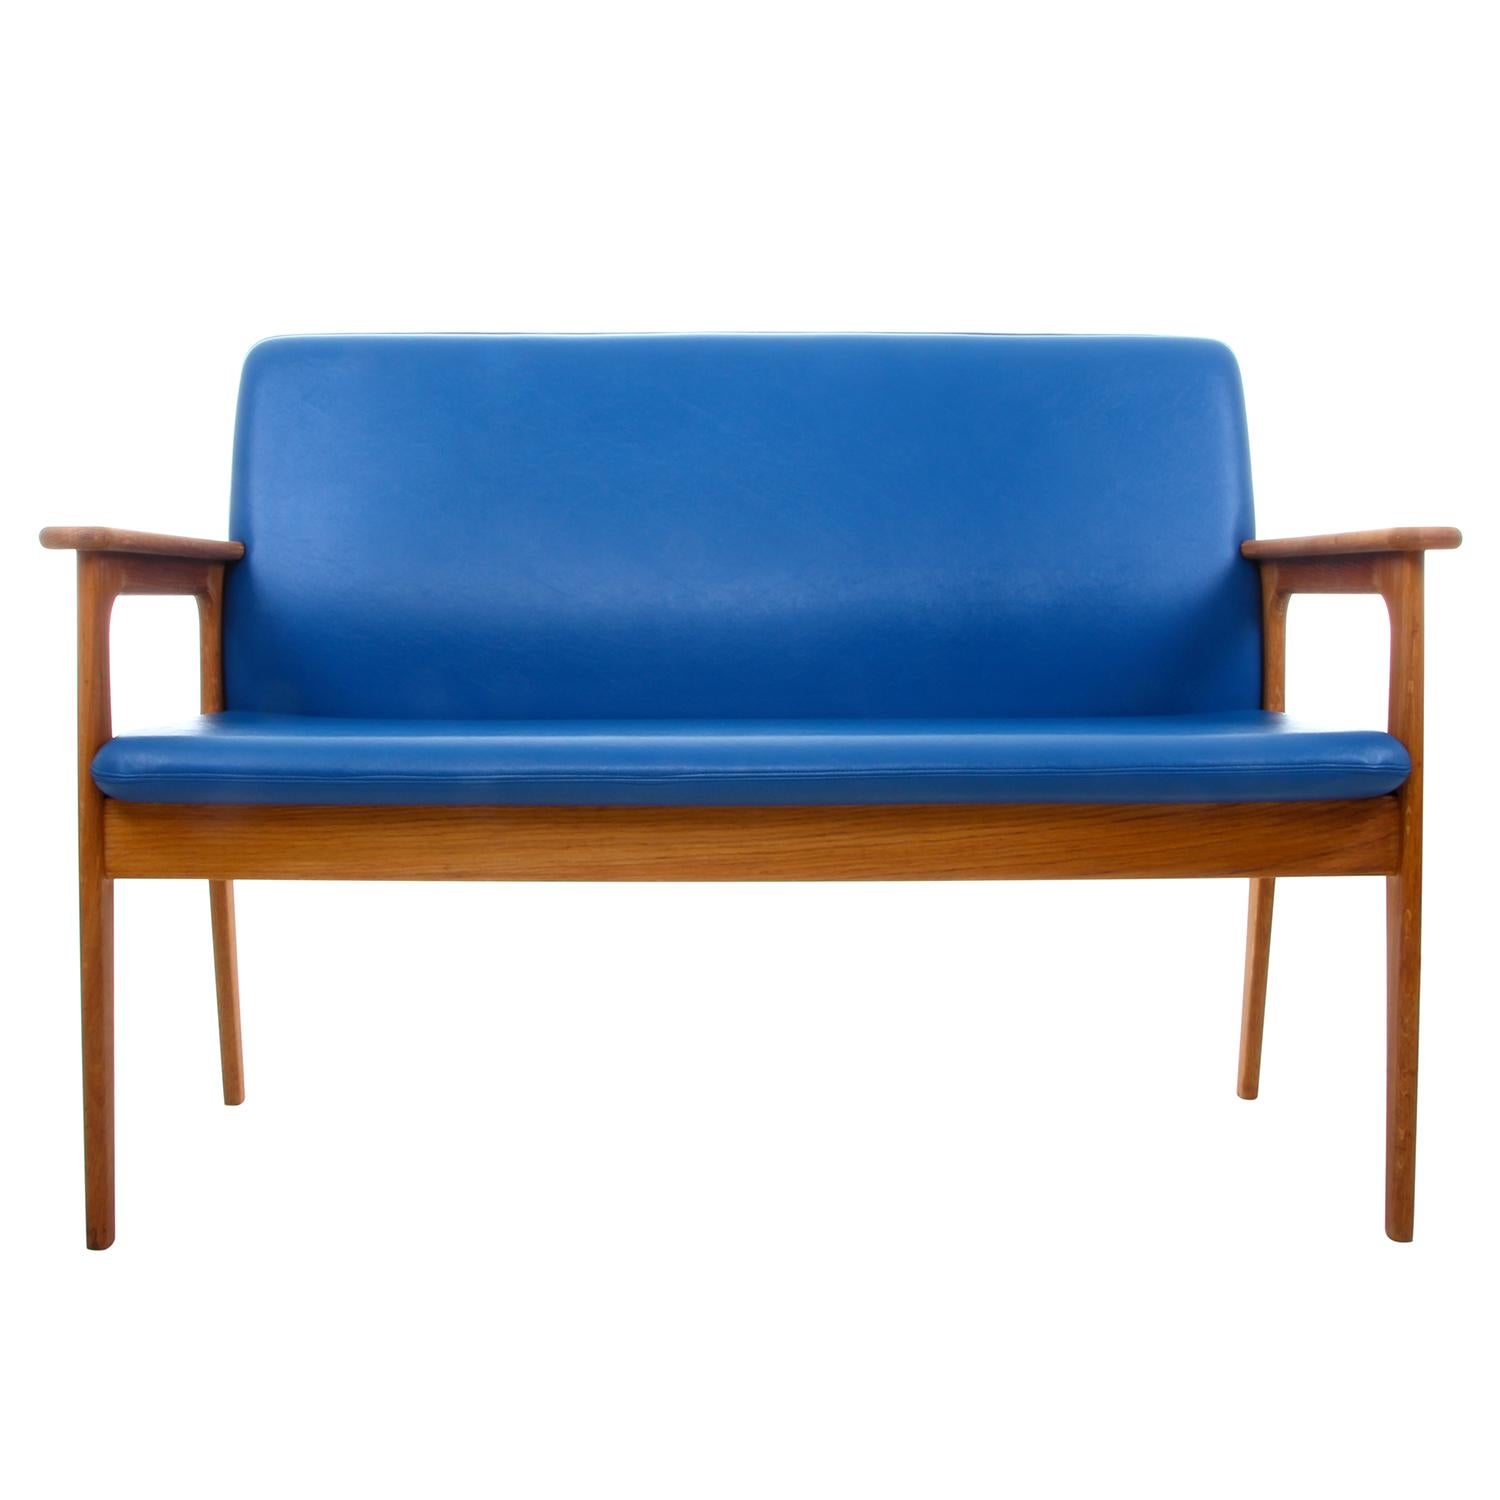 Two-seat sofa by Erik Buch, 1970s - Elegant oil-treated oak couch with the original clear blue upholstery produced at O.D. Møbler - all in very good vintage condition.

Gorgeous two seat sofa comprised of oak frame with armrests, oil-treated which